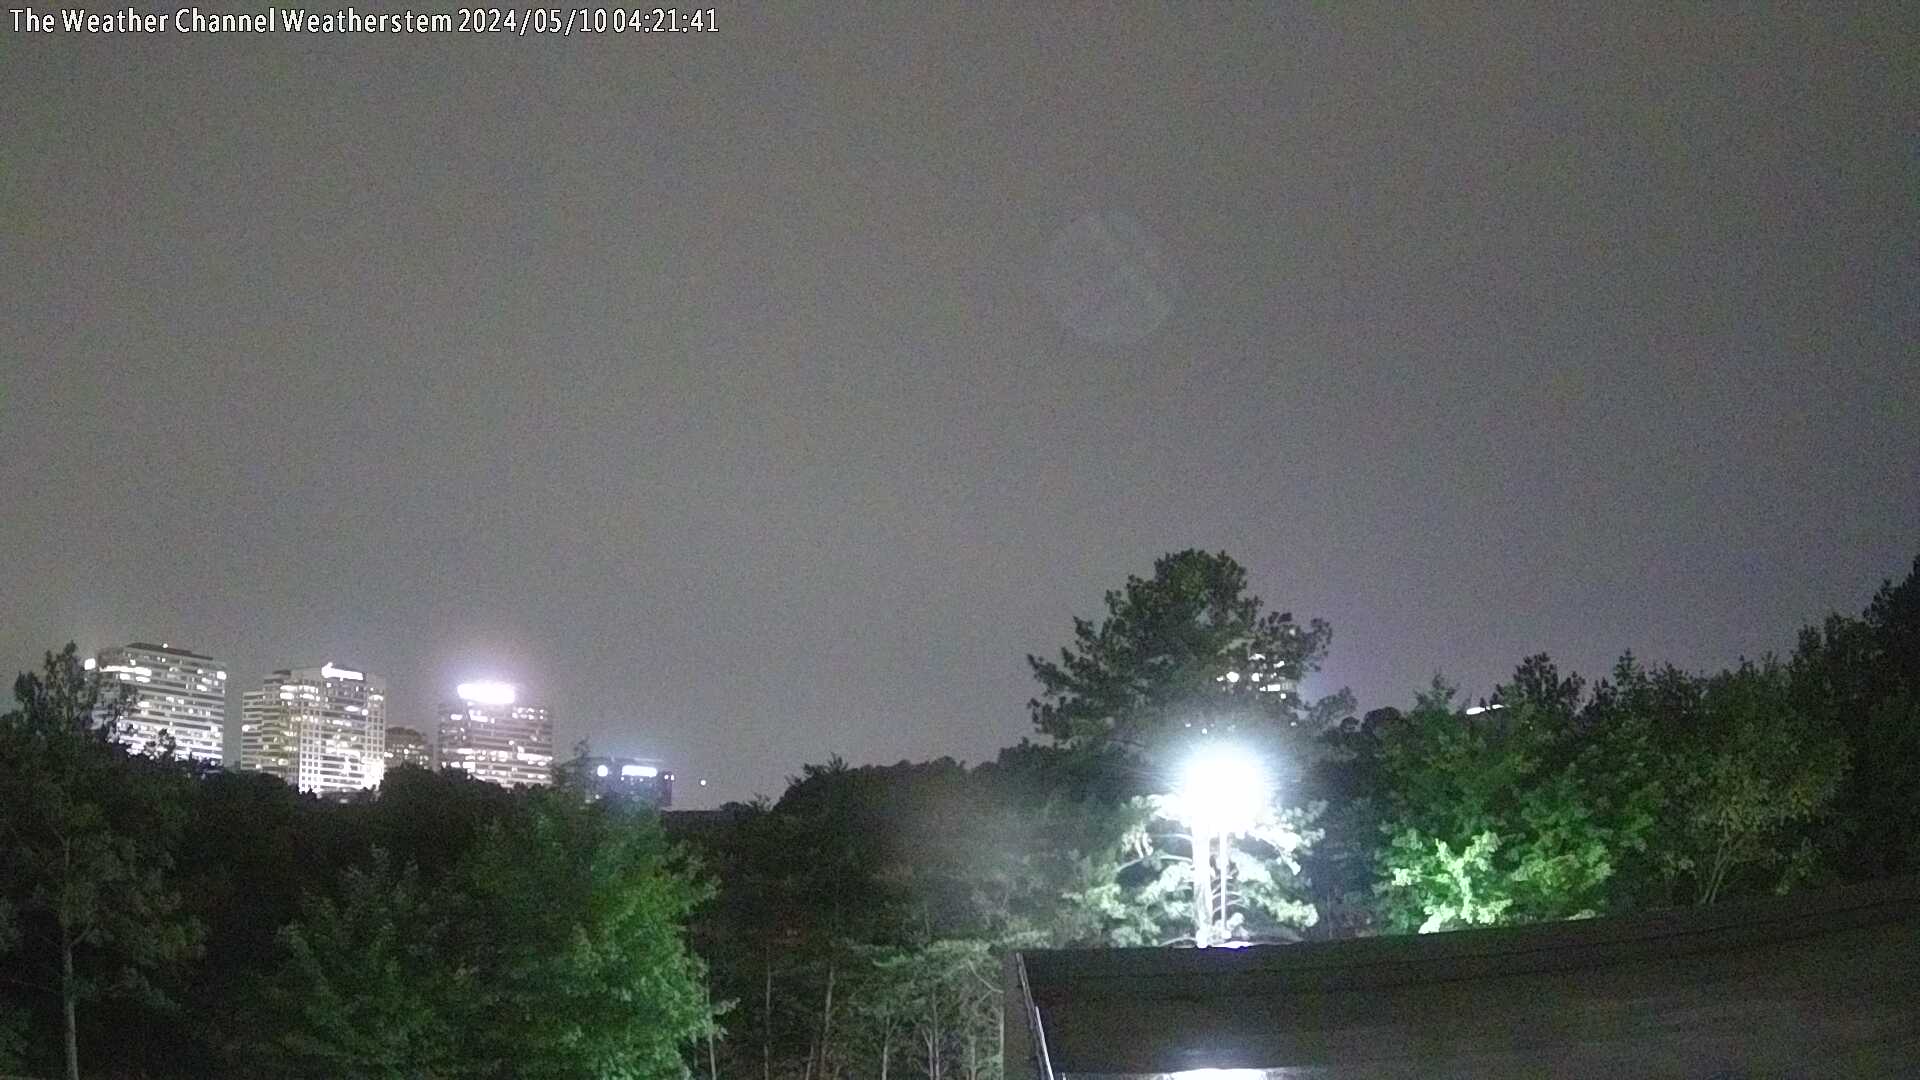  WeatherSTEM Cloud Camera TWCWeatherSTEM in Cobb County, Georgia GA at The Weather Channel